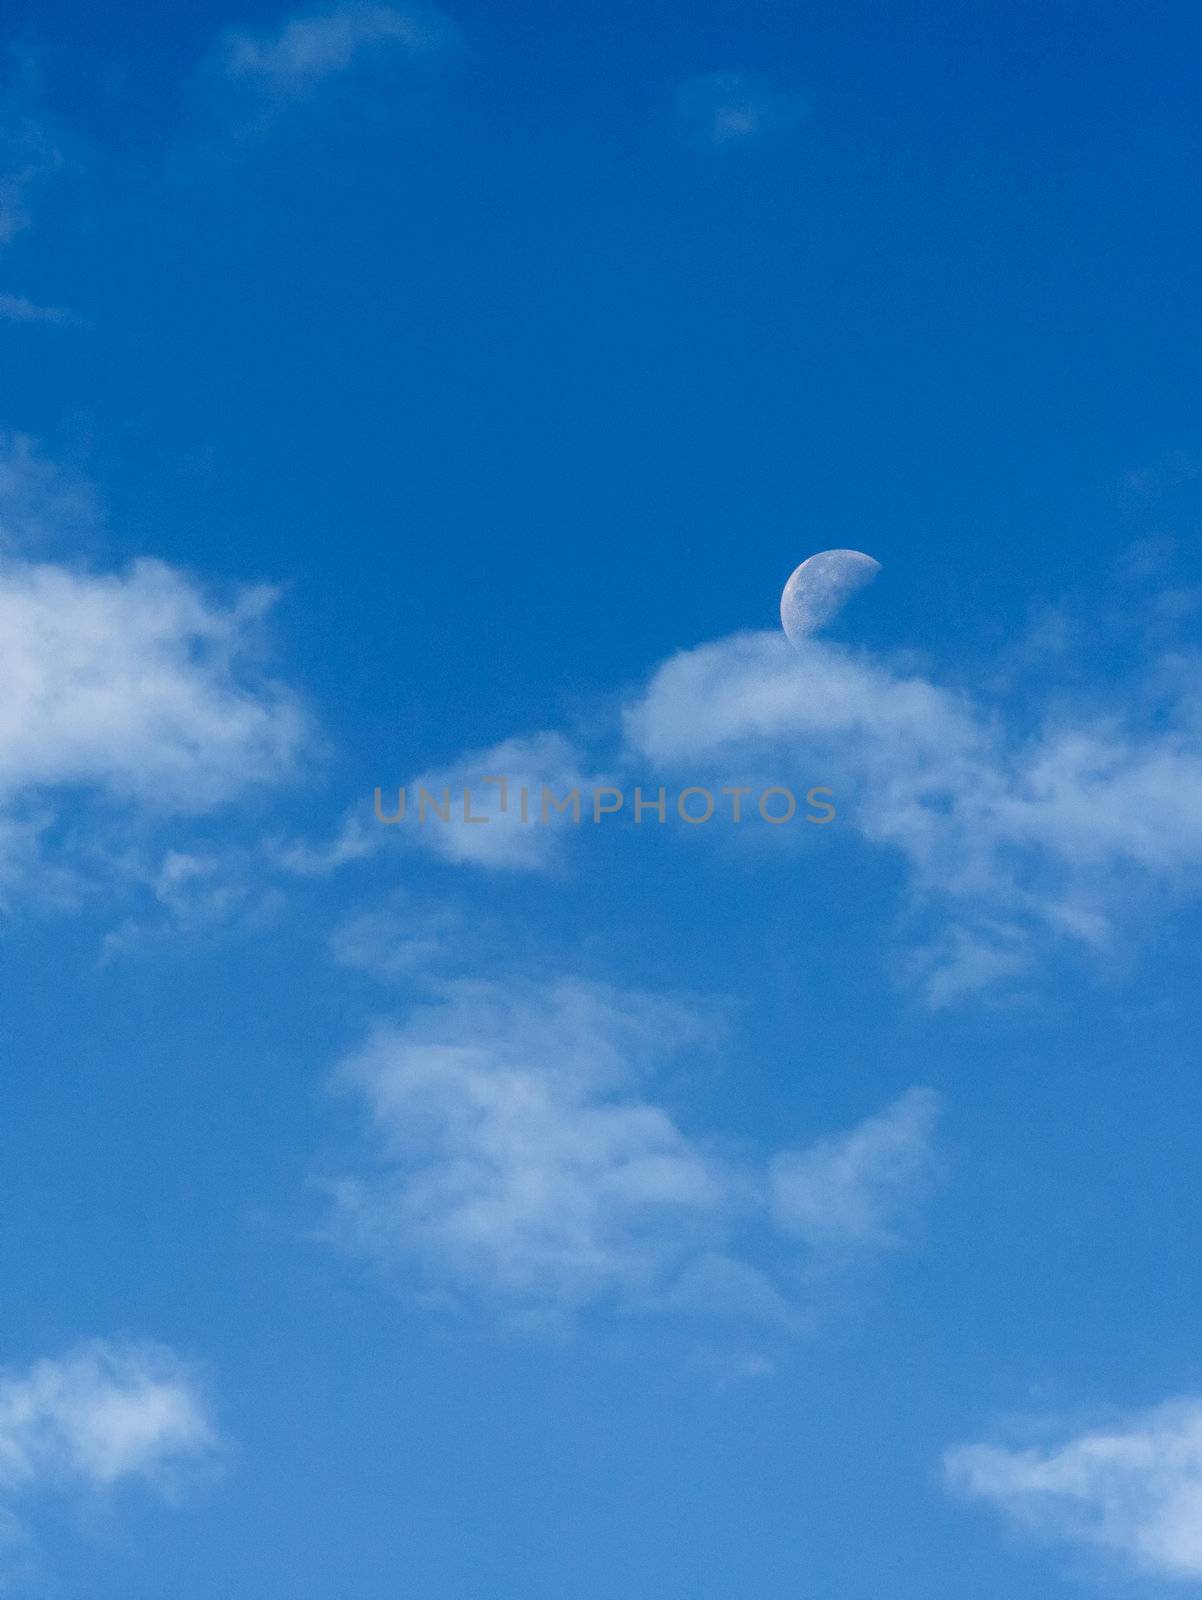 Bright blue morning sky with the half moon and clouds